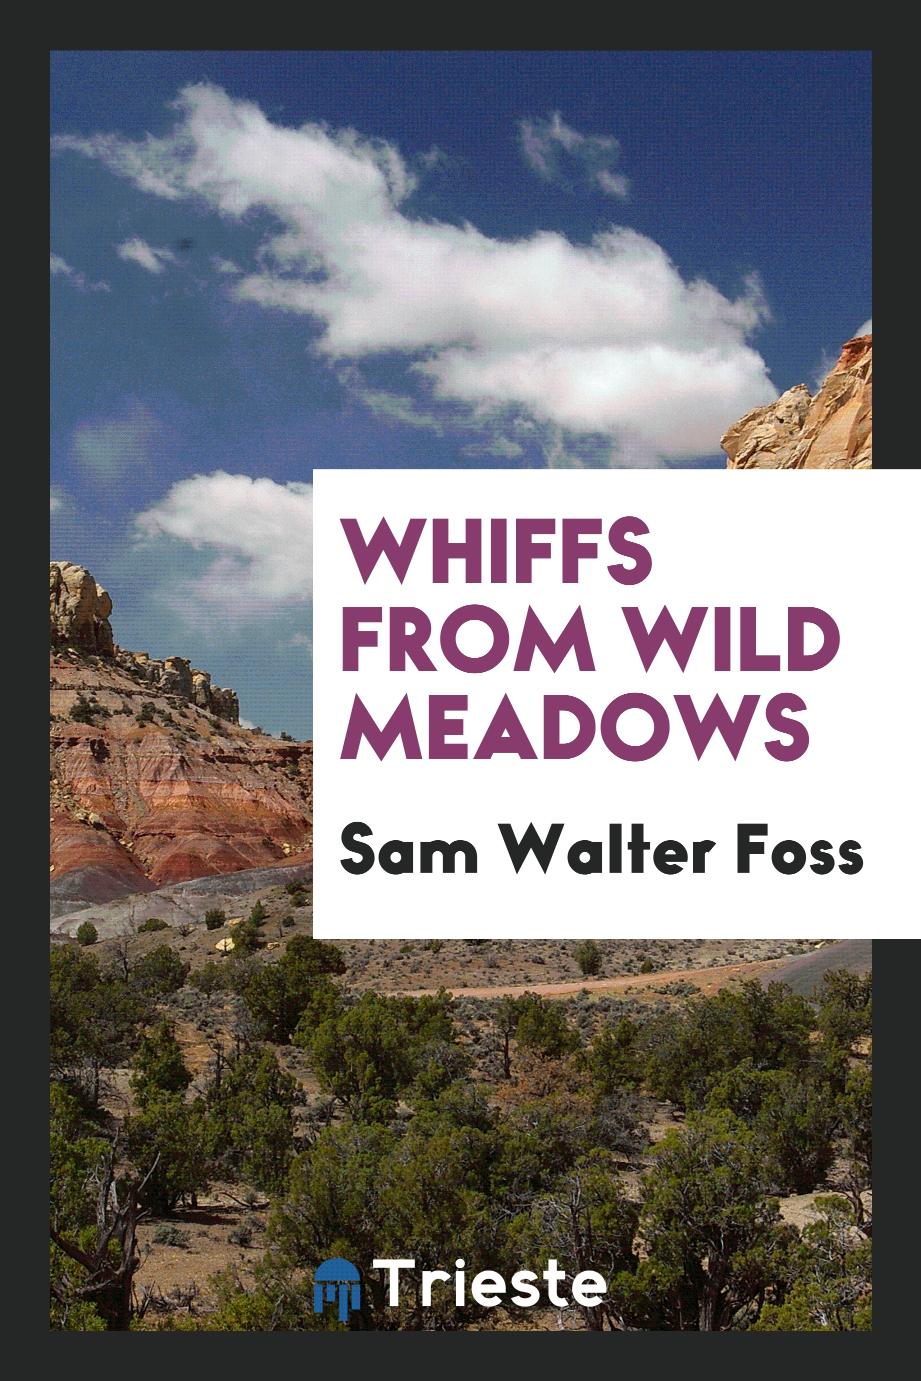 Whiffs from wild meadows